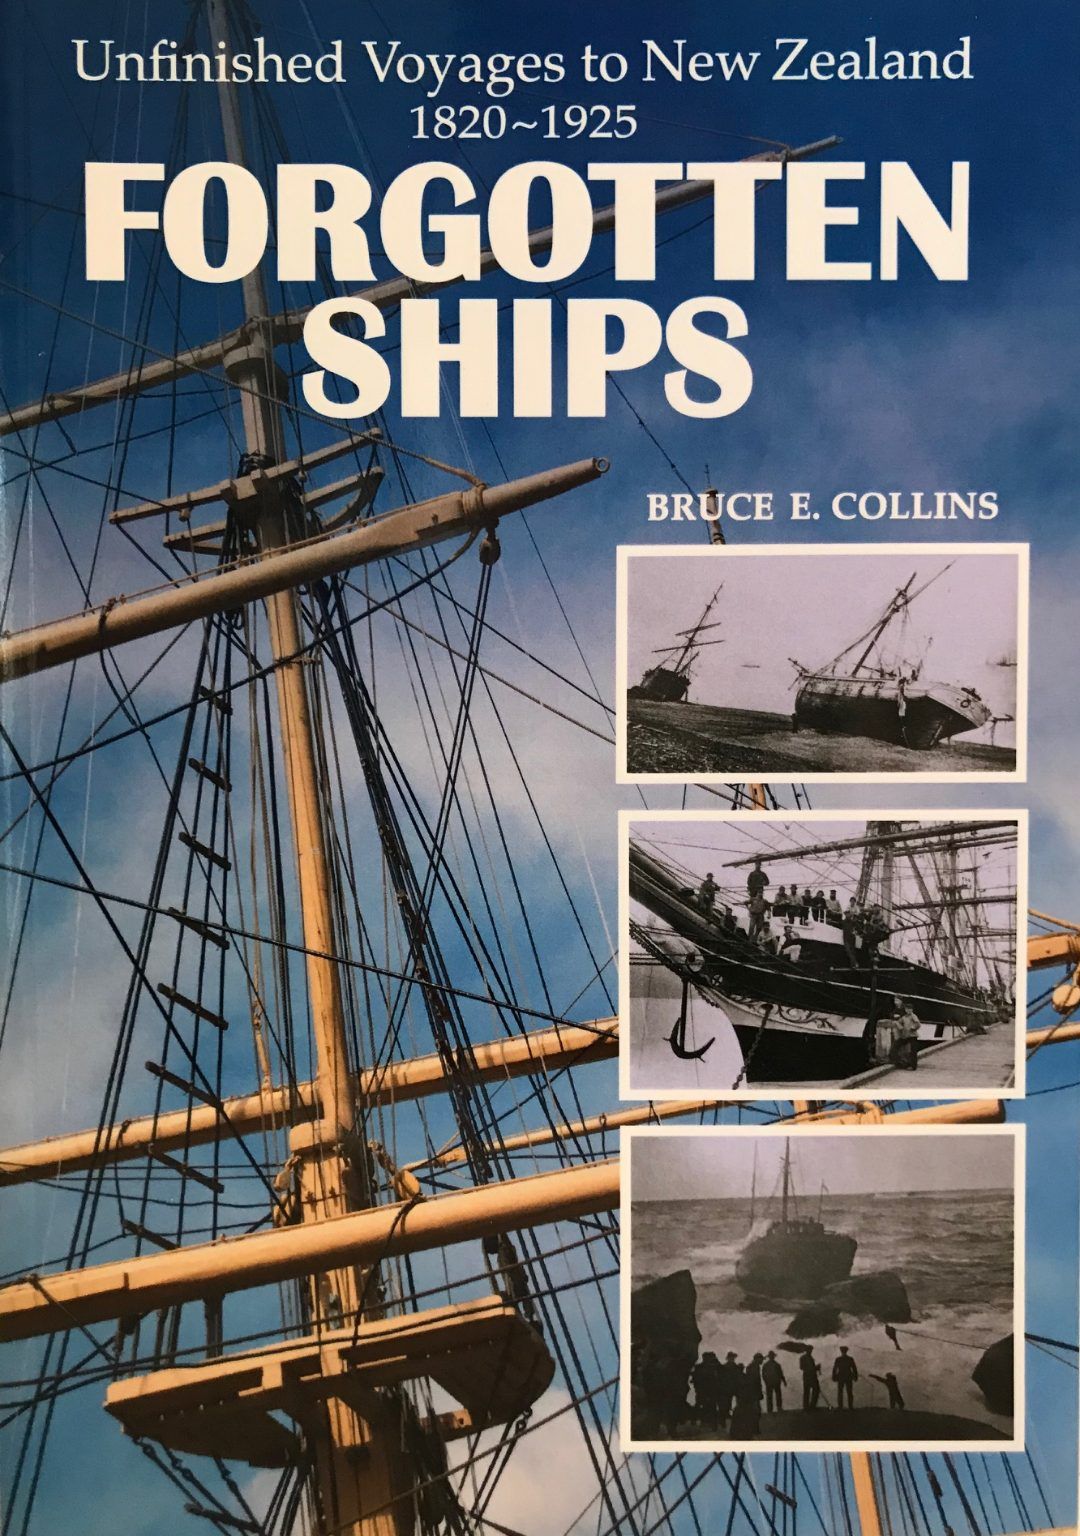 FORGOTTEN SHIPS: Unfinished Voyages To New Zealand 1820-1925